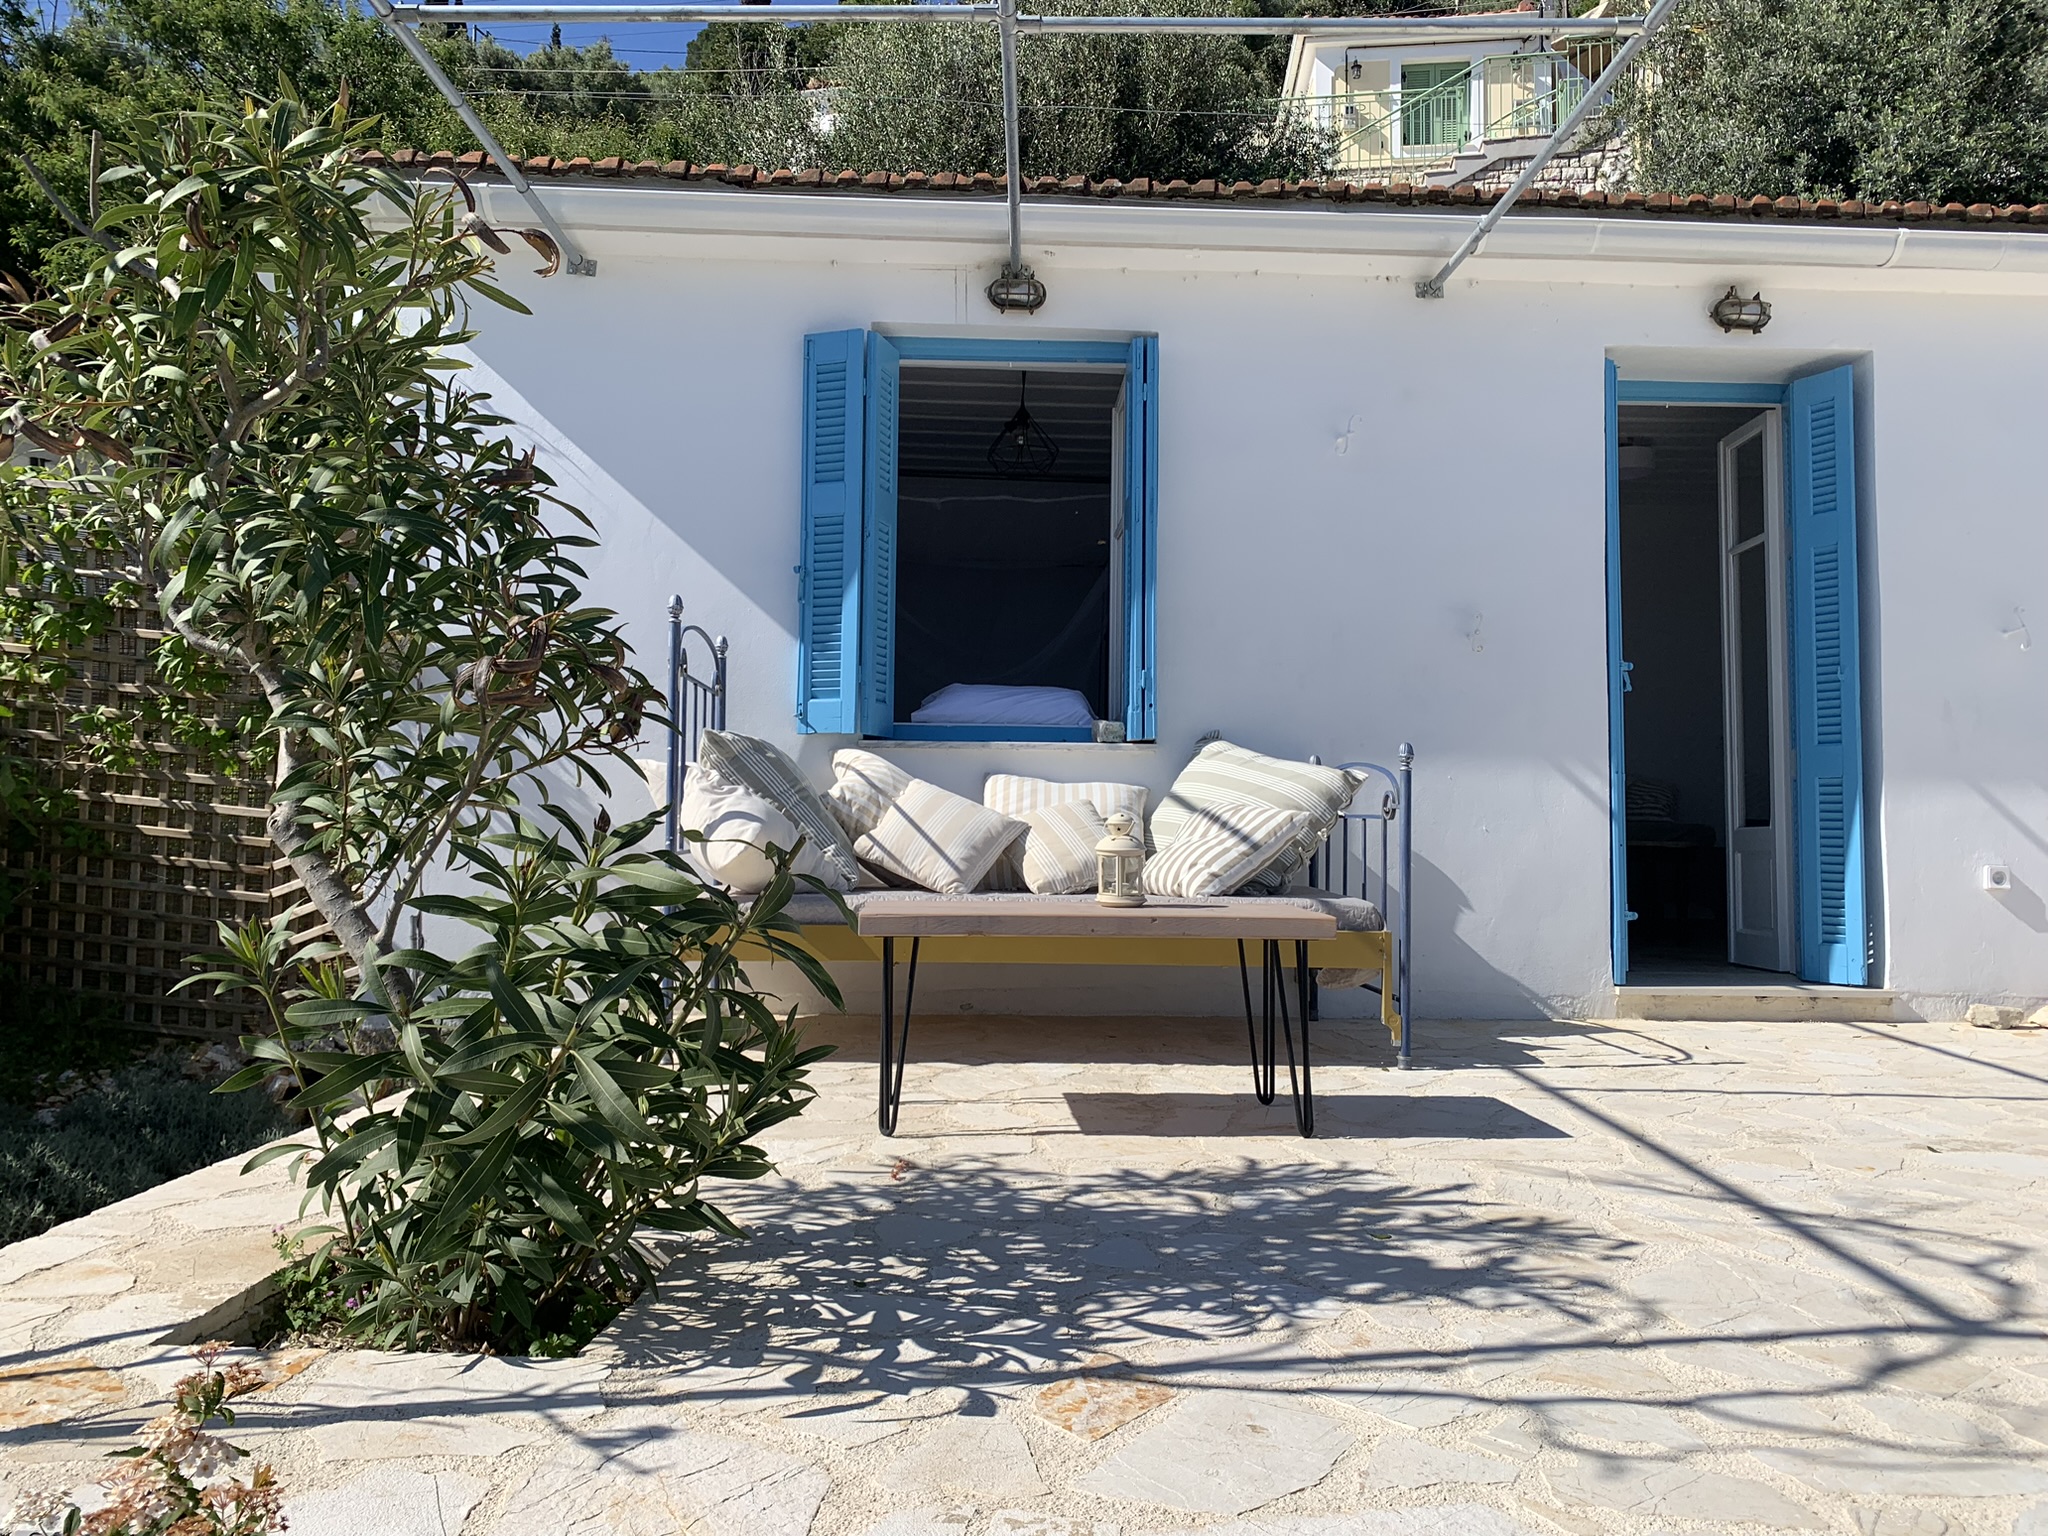 Outdoor areas of house for sale on Ithaca Greece, Perachori